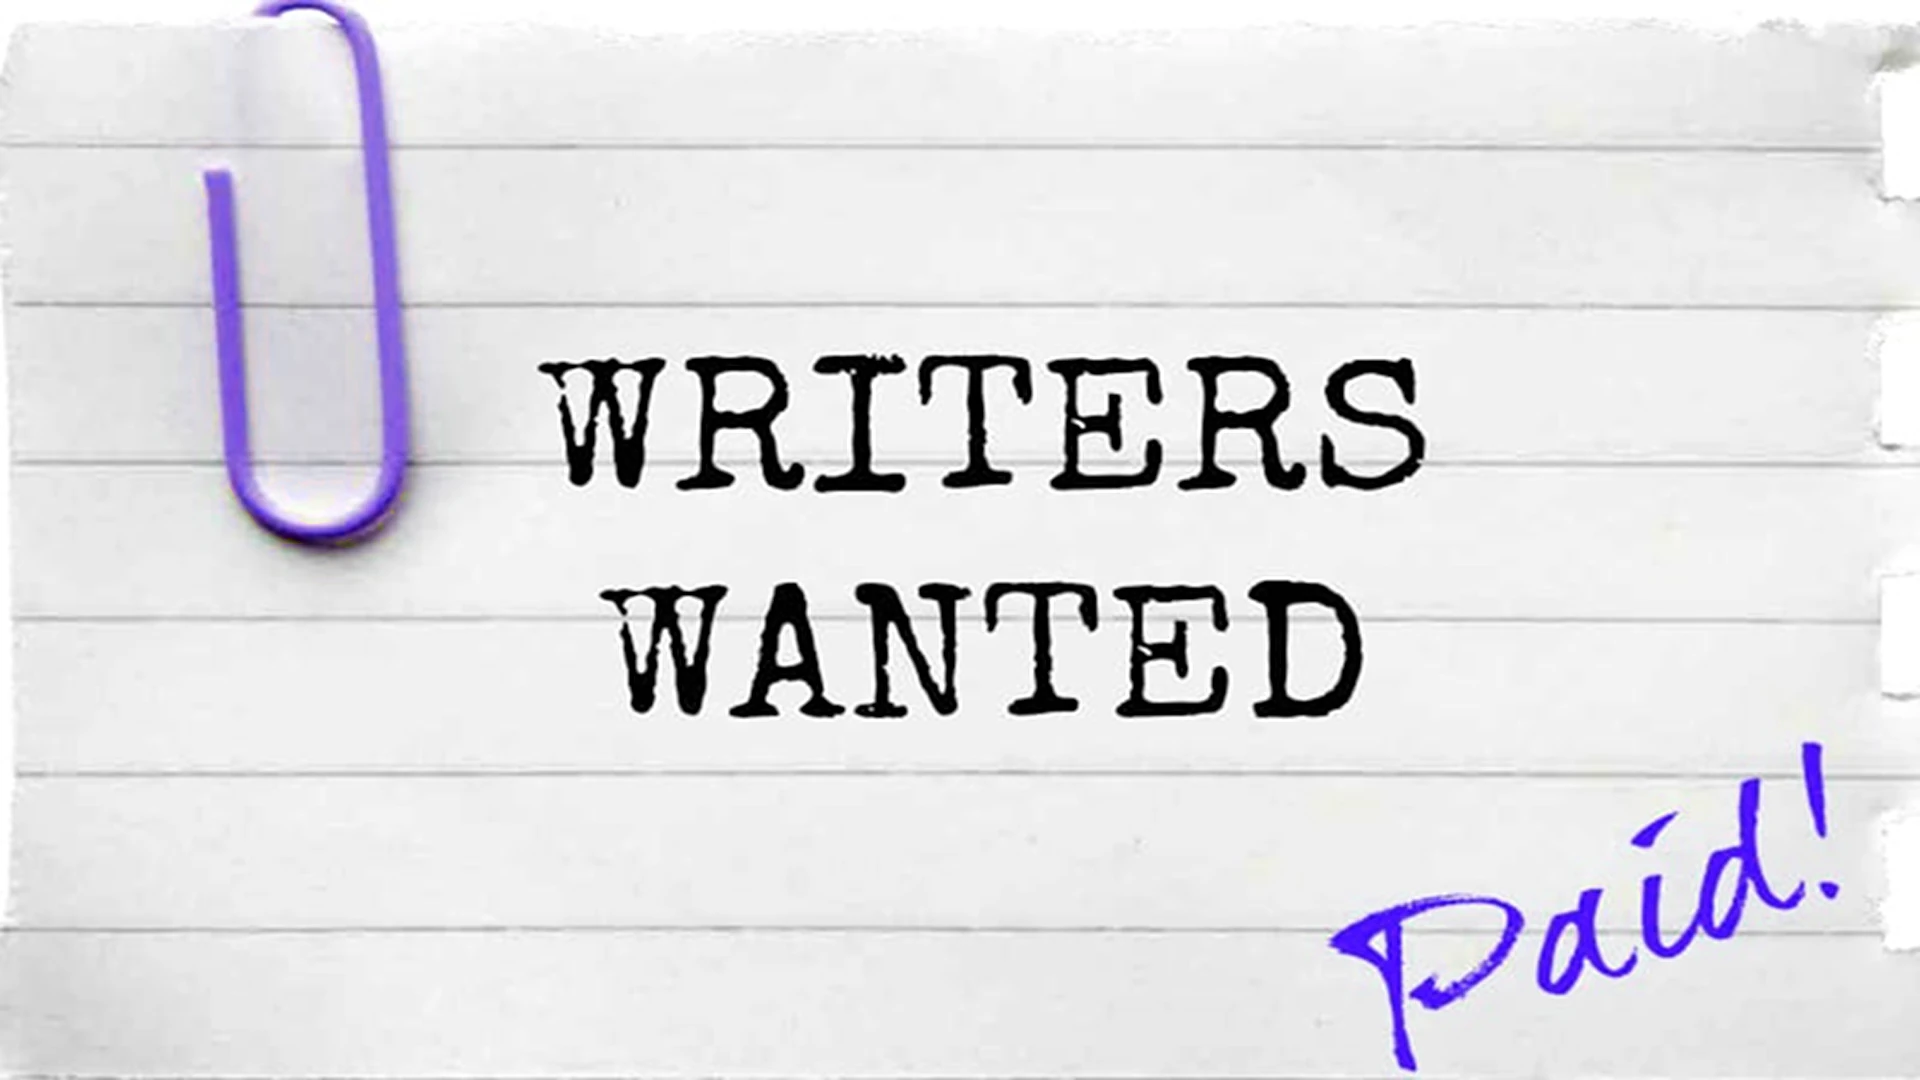 AboutFLR.com is Looking for Paid and Volunteer Writers